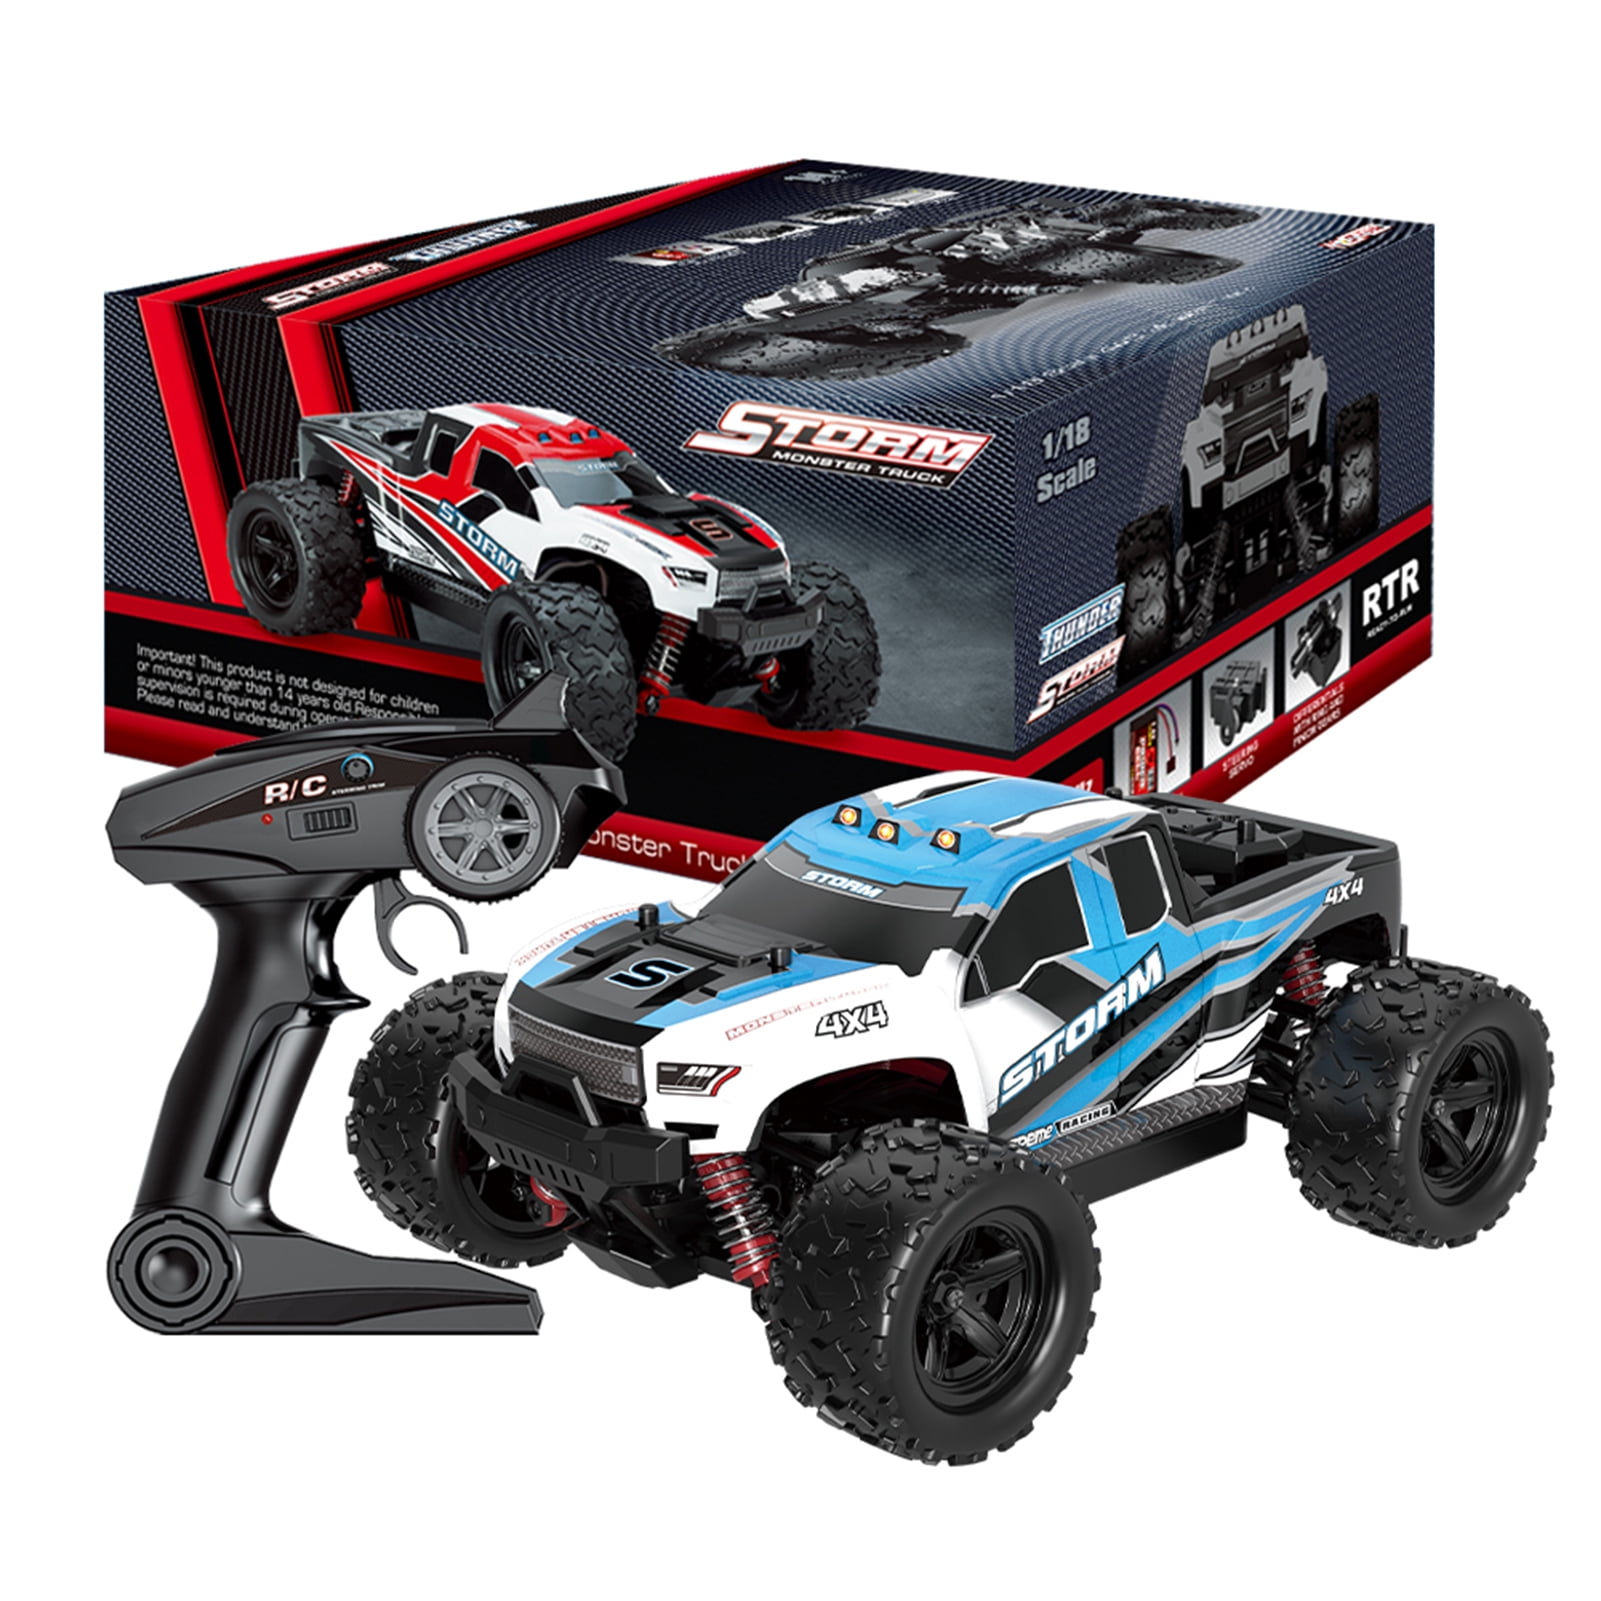 S-Track 1/12 Scale High Speed 18Km/h R/C Electric 4Wheel Drive Racing Truggy BOX 